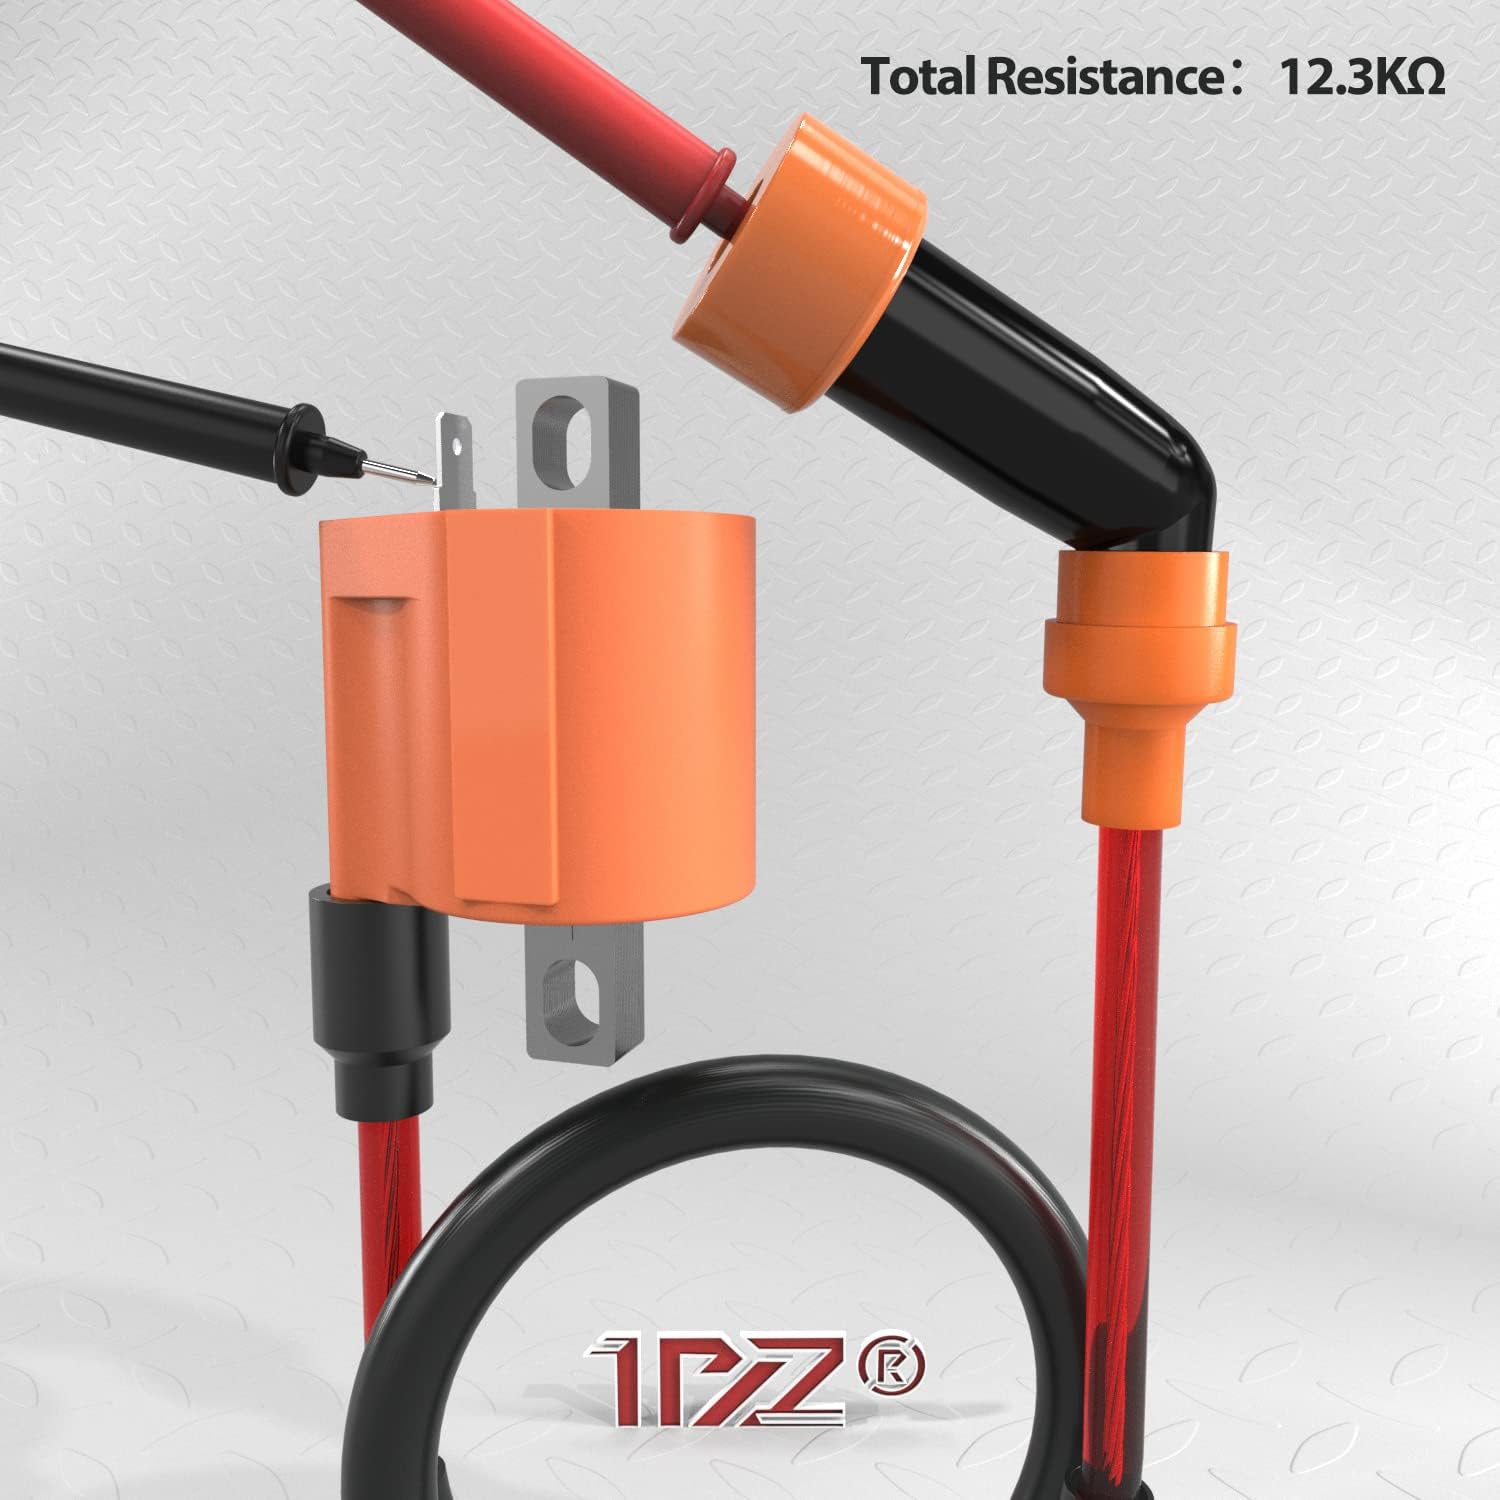 1PZ Ignition Coil Spark Plug CDI Box Replacement for SUZUKI Quadrunner 250 1988-2002 Quadrunner 4WD 1987-1993 King Quad 300 1995-2002 Compatible with 32900-19B40 32900-19B50 3530-011 3530-024